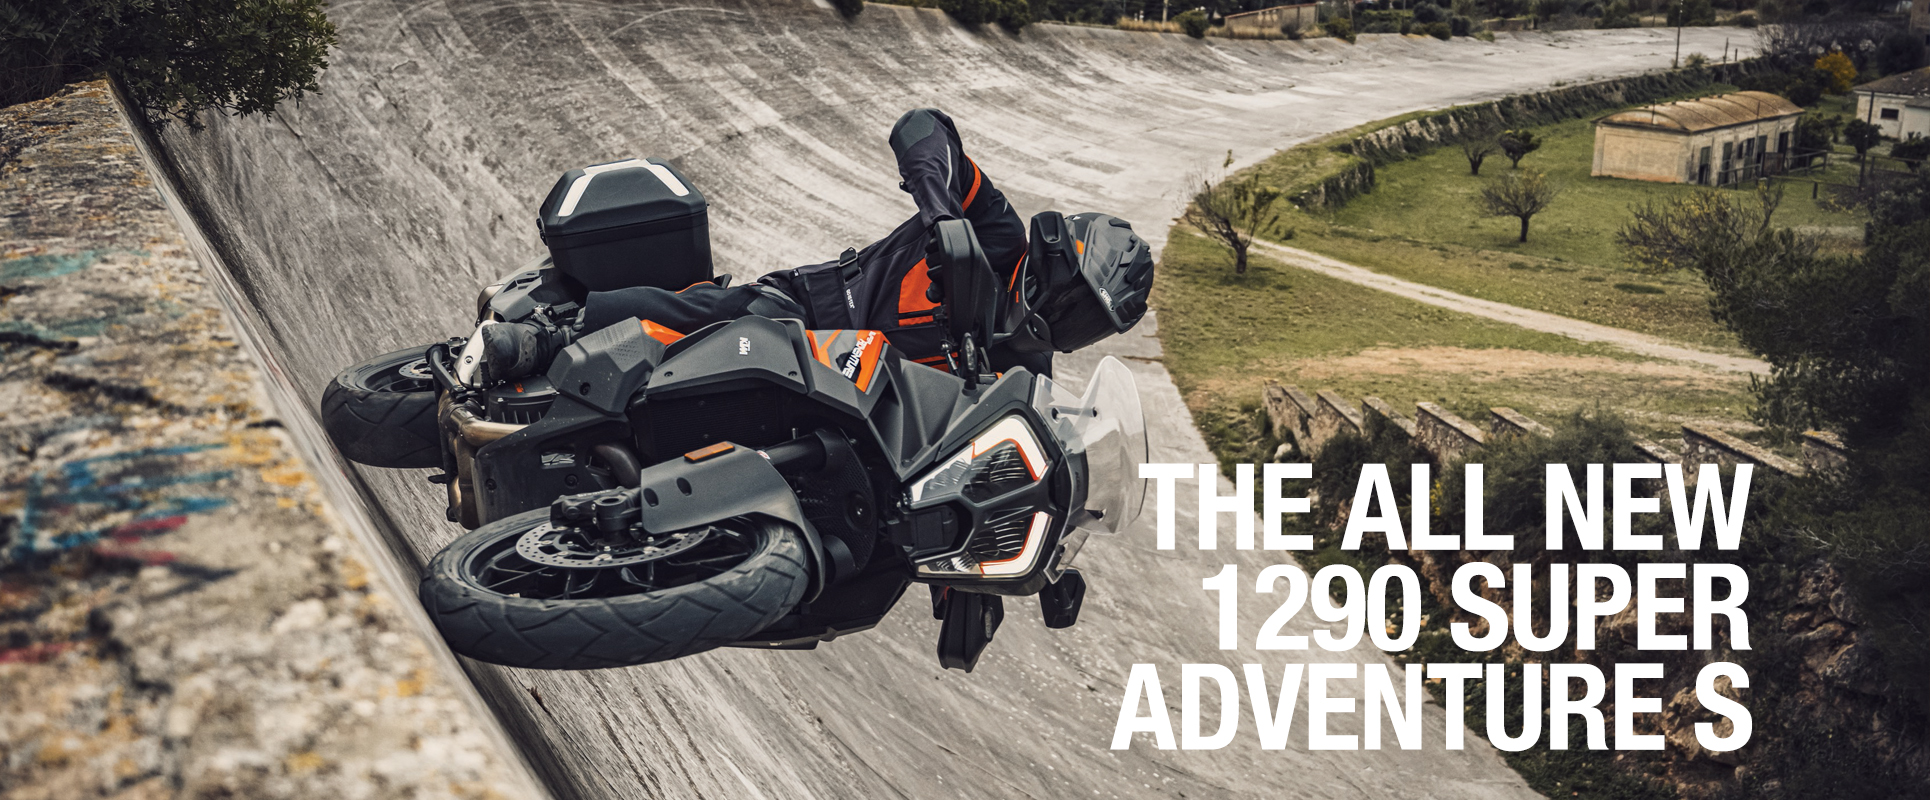 26/01/2021 - OUT NOW: THE NEW KTM 1290 SUPER ADVENTURE S